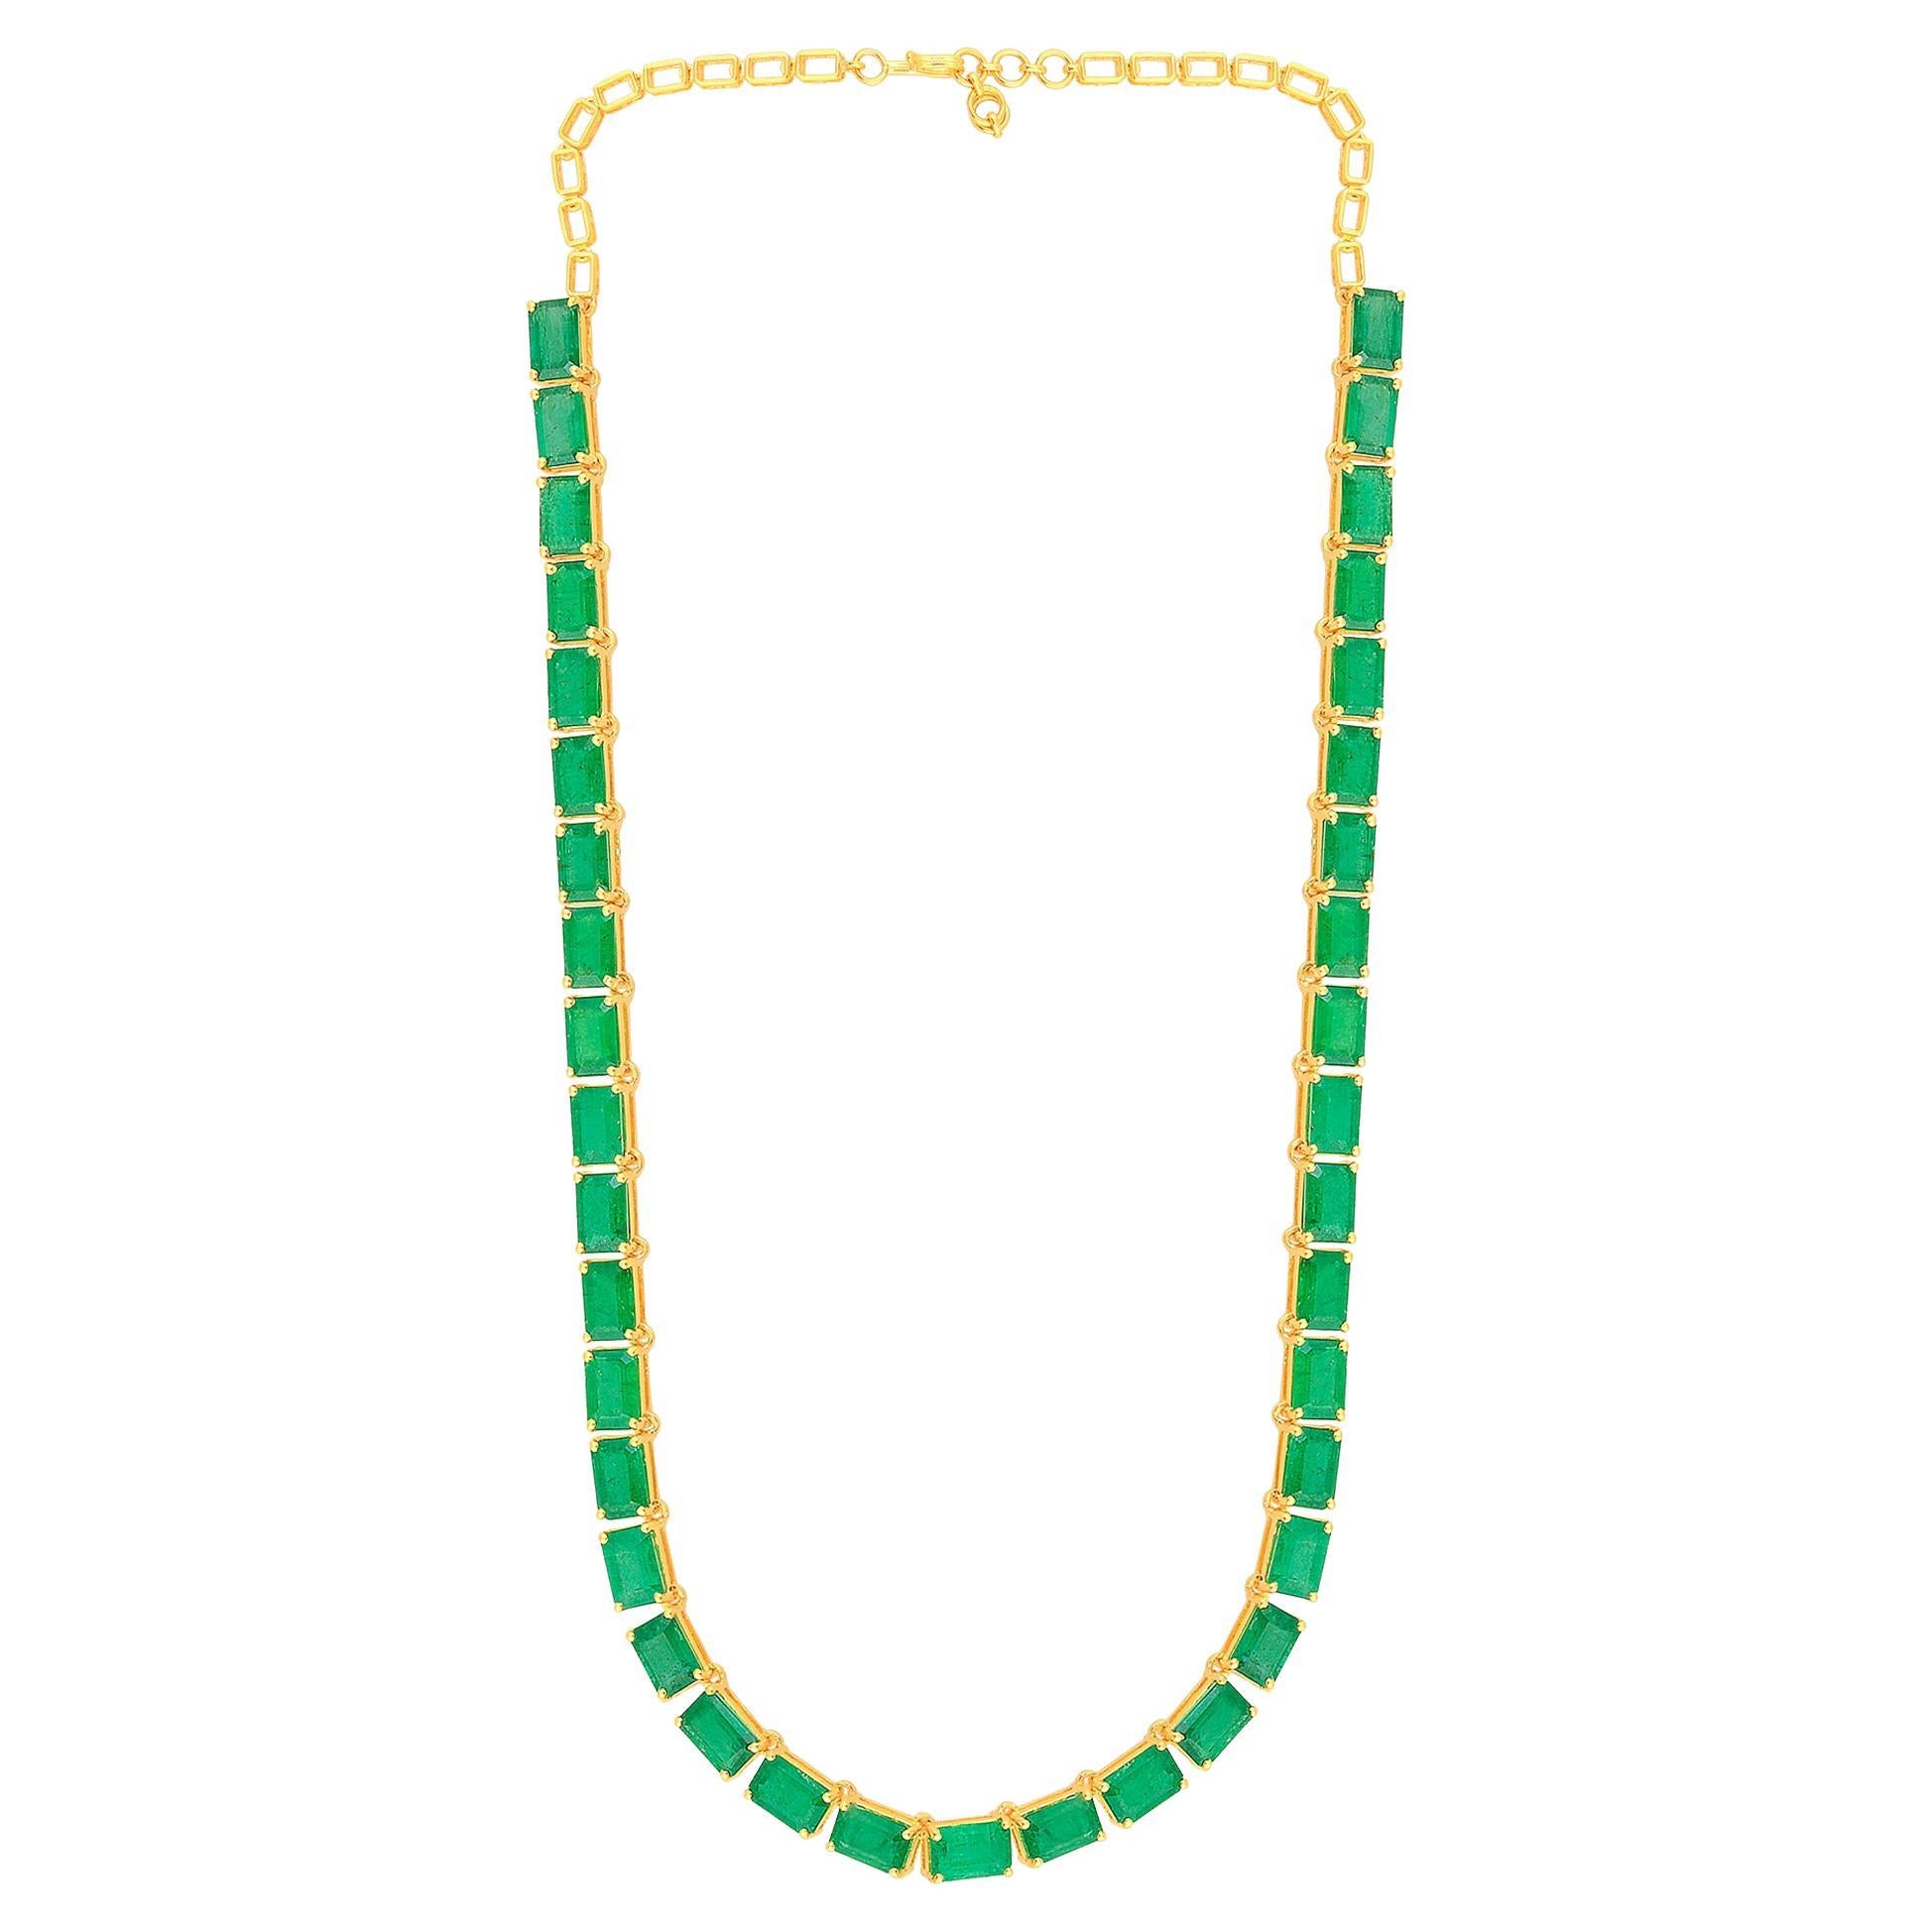 22.90 Carat Natural Emerald Gemstone Choker Necklace 14k Yellow Gold Jewelry For Sale